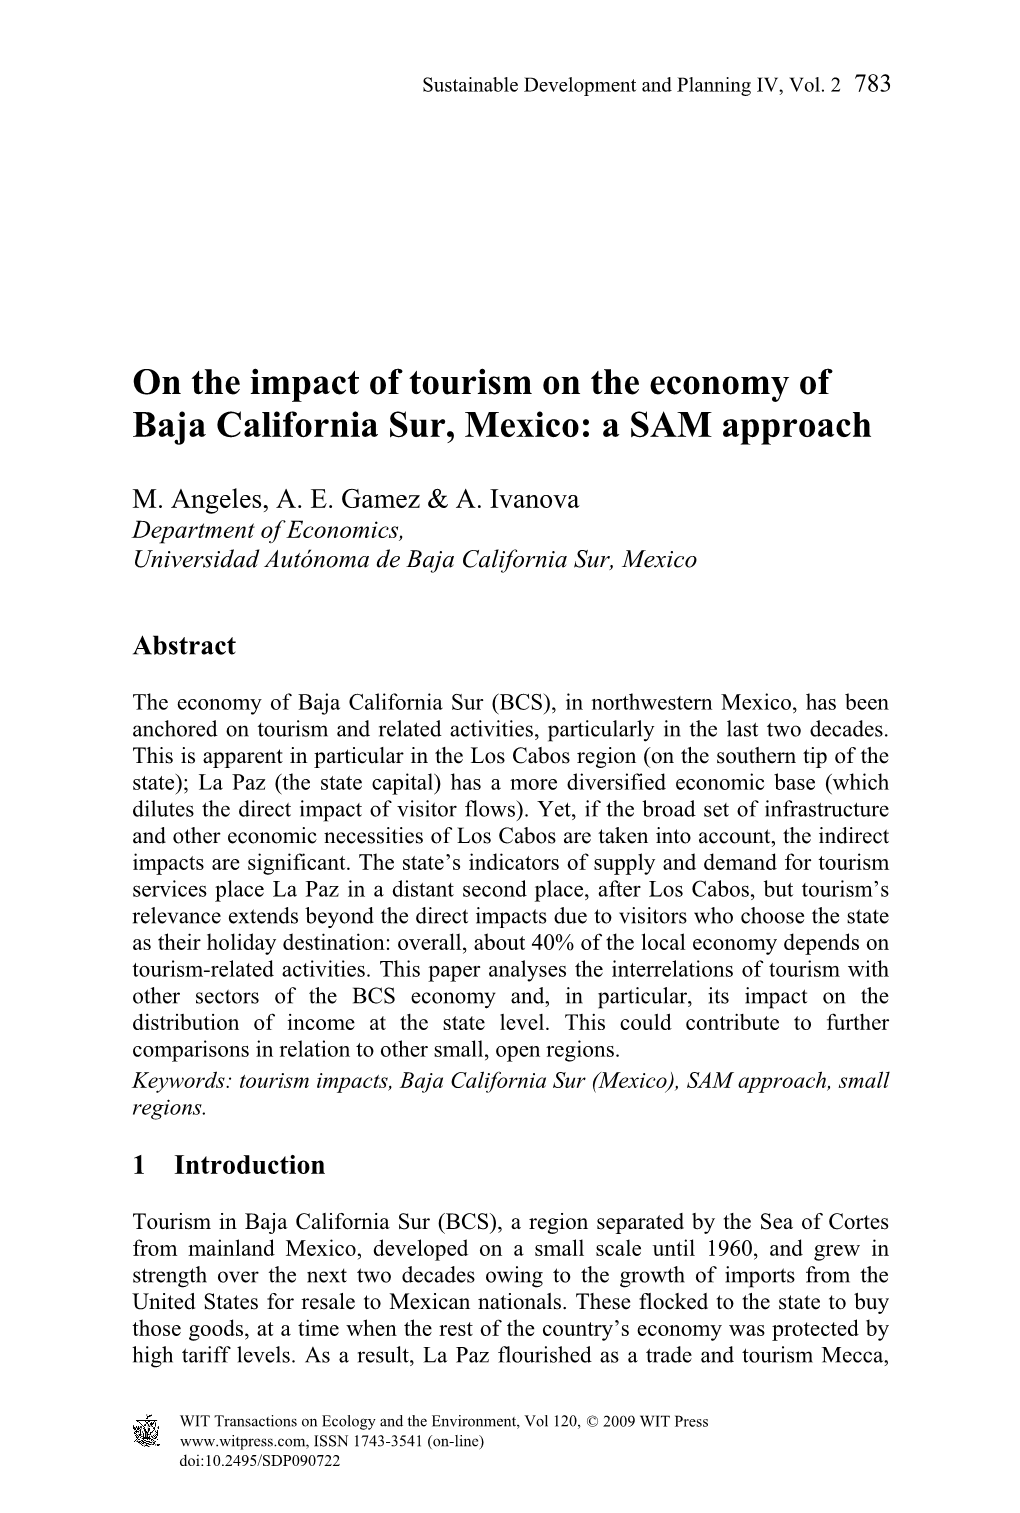 On the Impact of Tourism on the Economy of Baja California Sur, Mexico: a SAM Approach